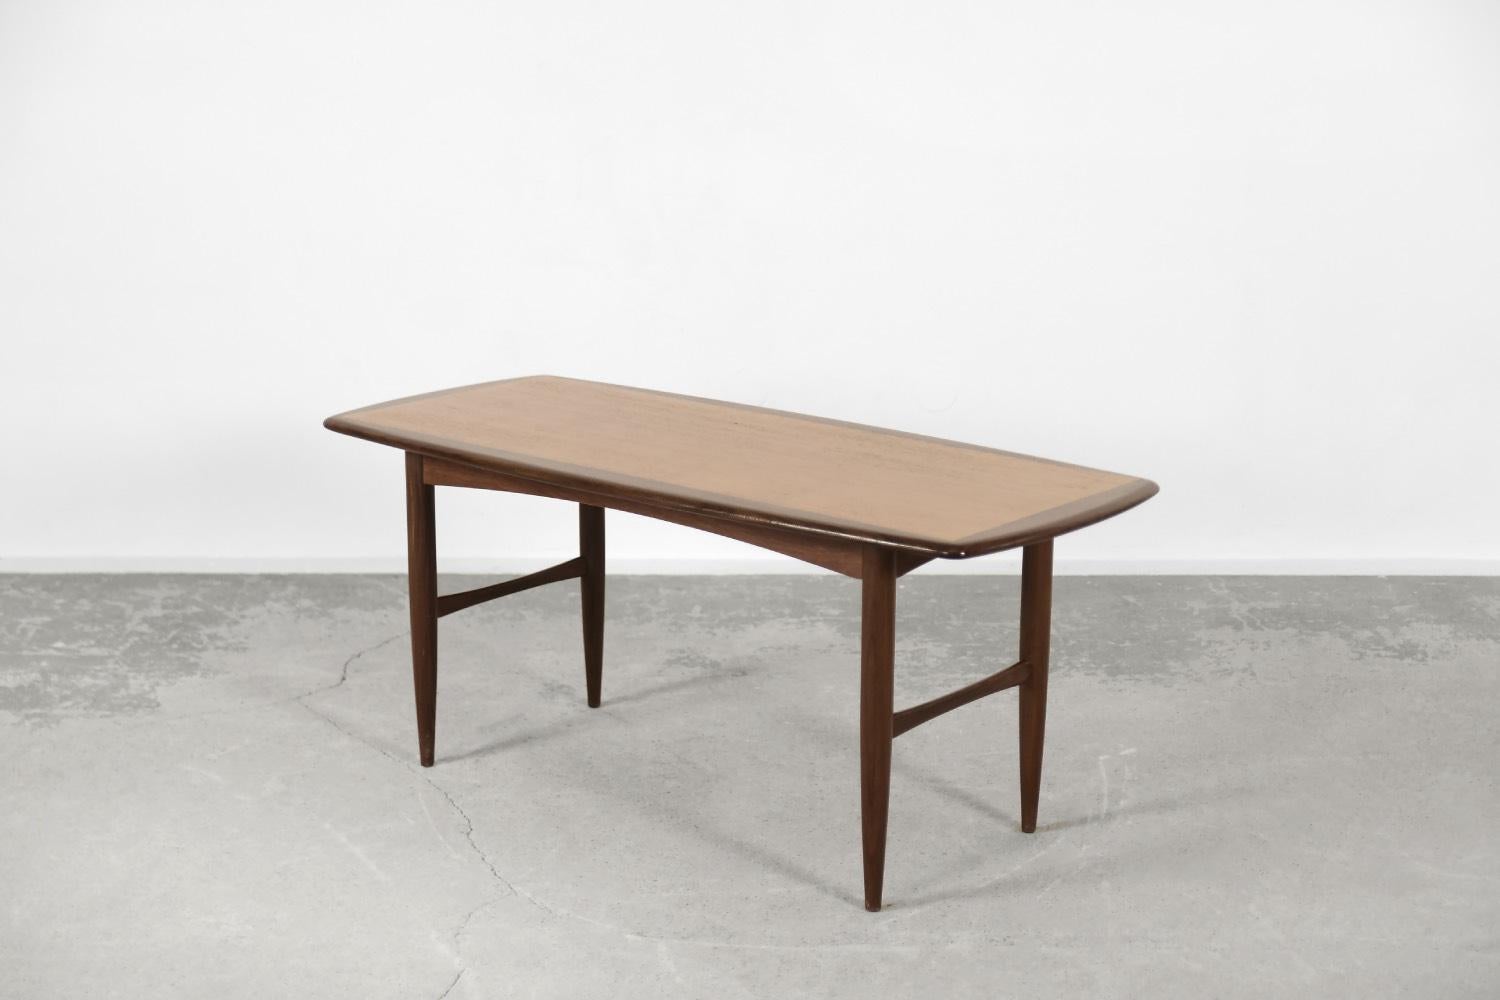 This coffee table was made by the Swedish manufacturer HMB Möbler, in Rörvik during the 1950s. It is made of high-quality teak wood, which is extremely resistant to external factors and owes its longevity mainly to a specific composition, rich in